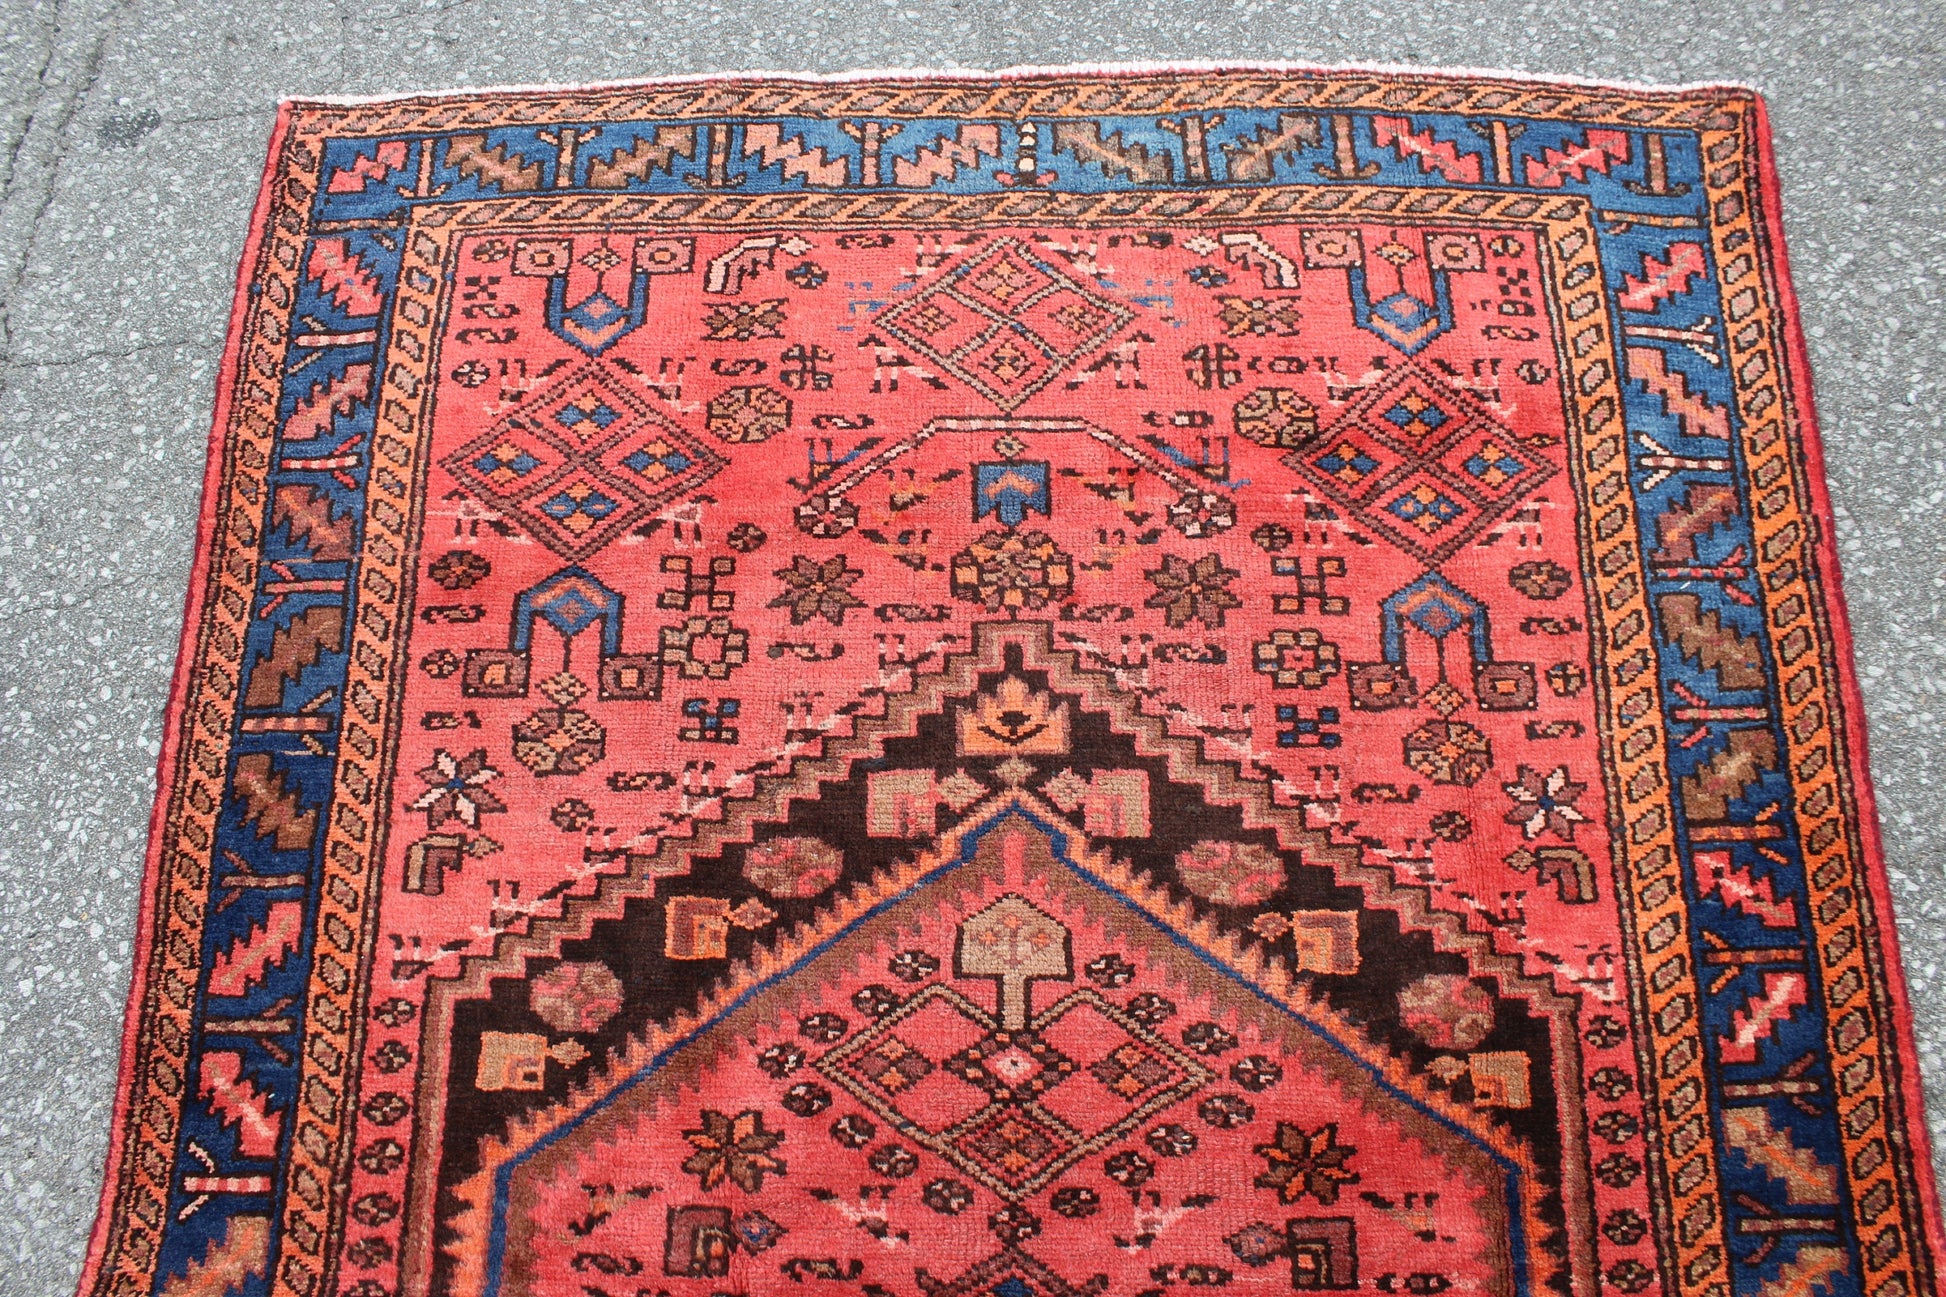 Coral Pink Handmade 4x6 Persian Rug with Blue Bordered Outline